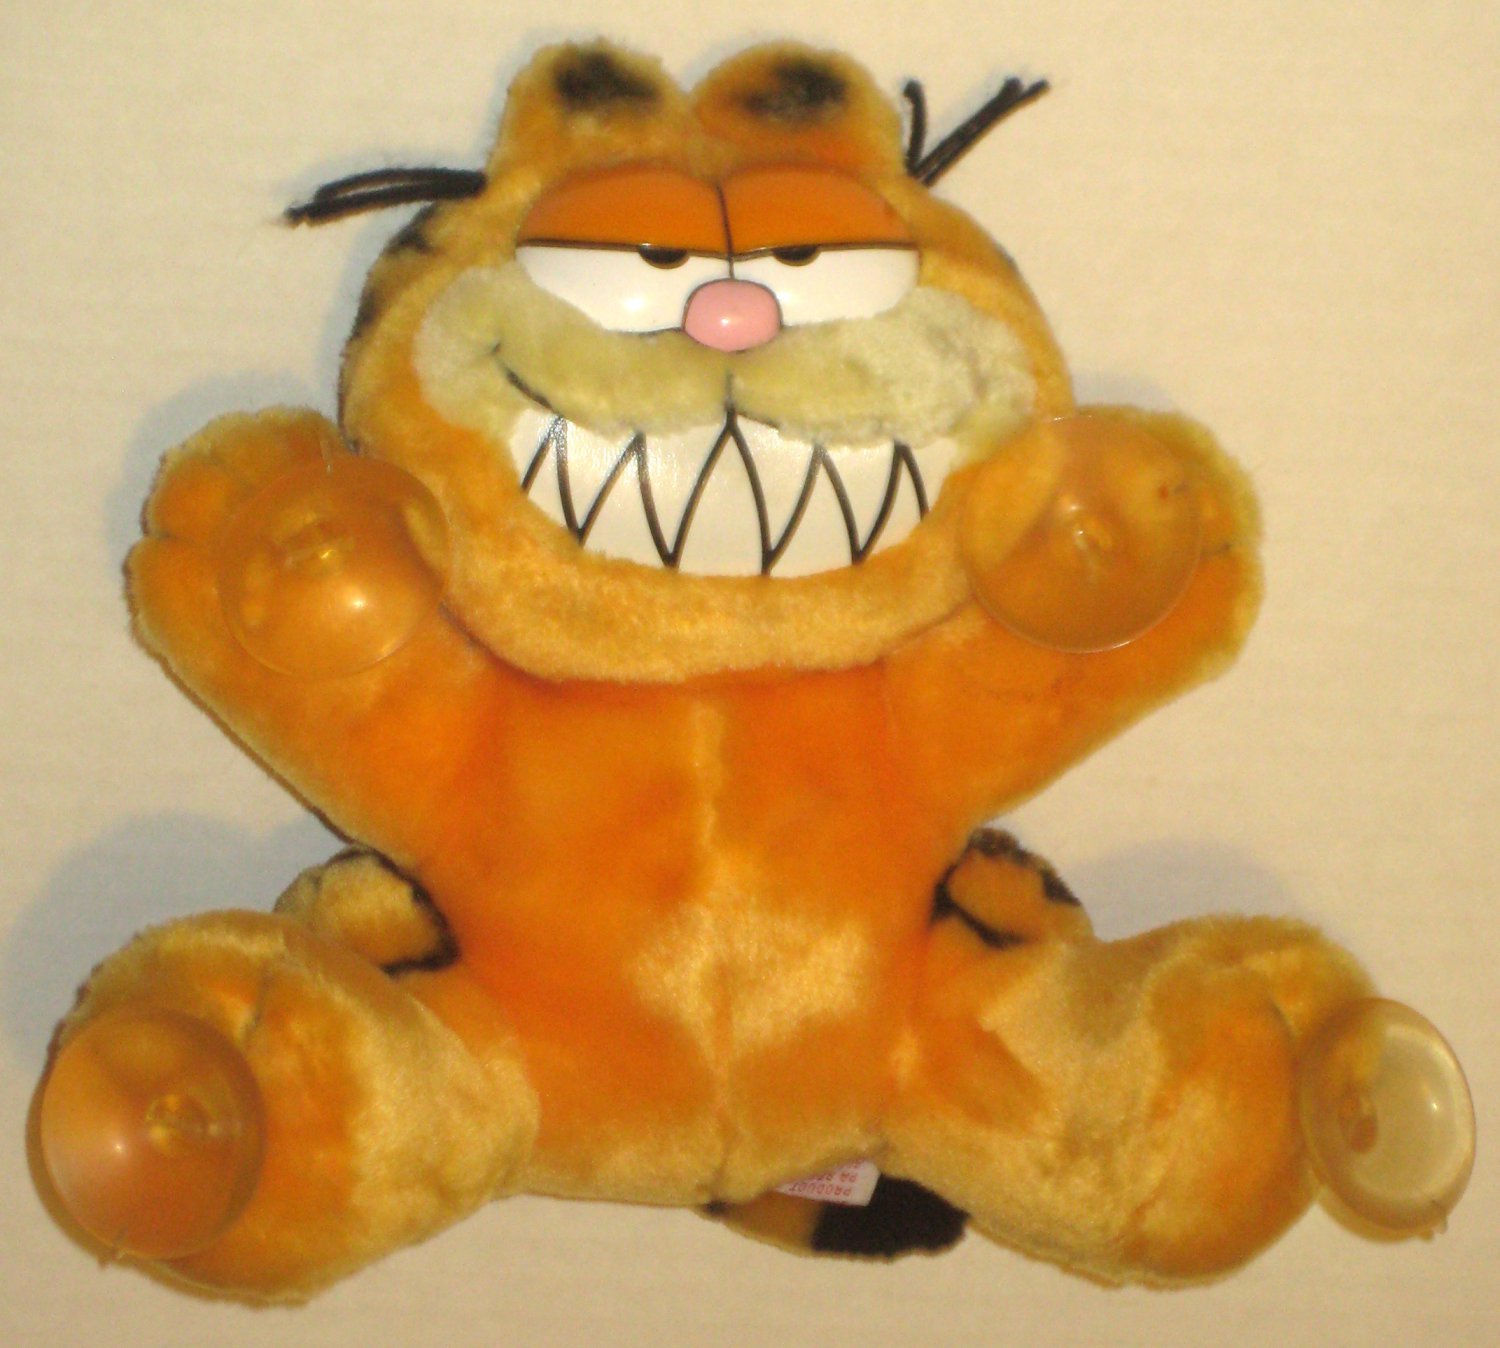 garfield plush with suction cups